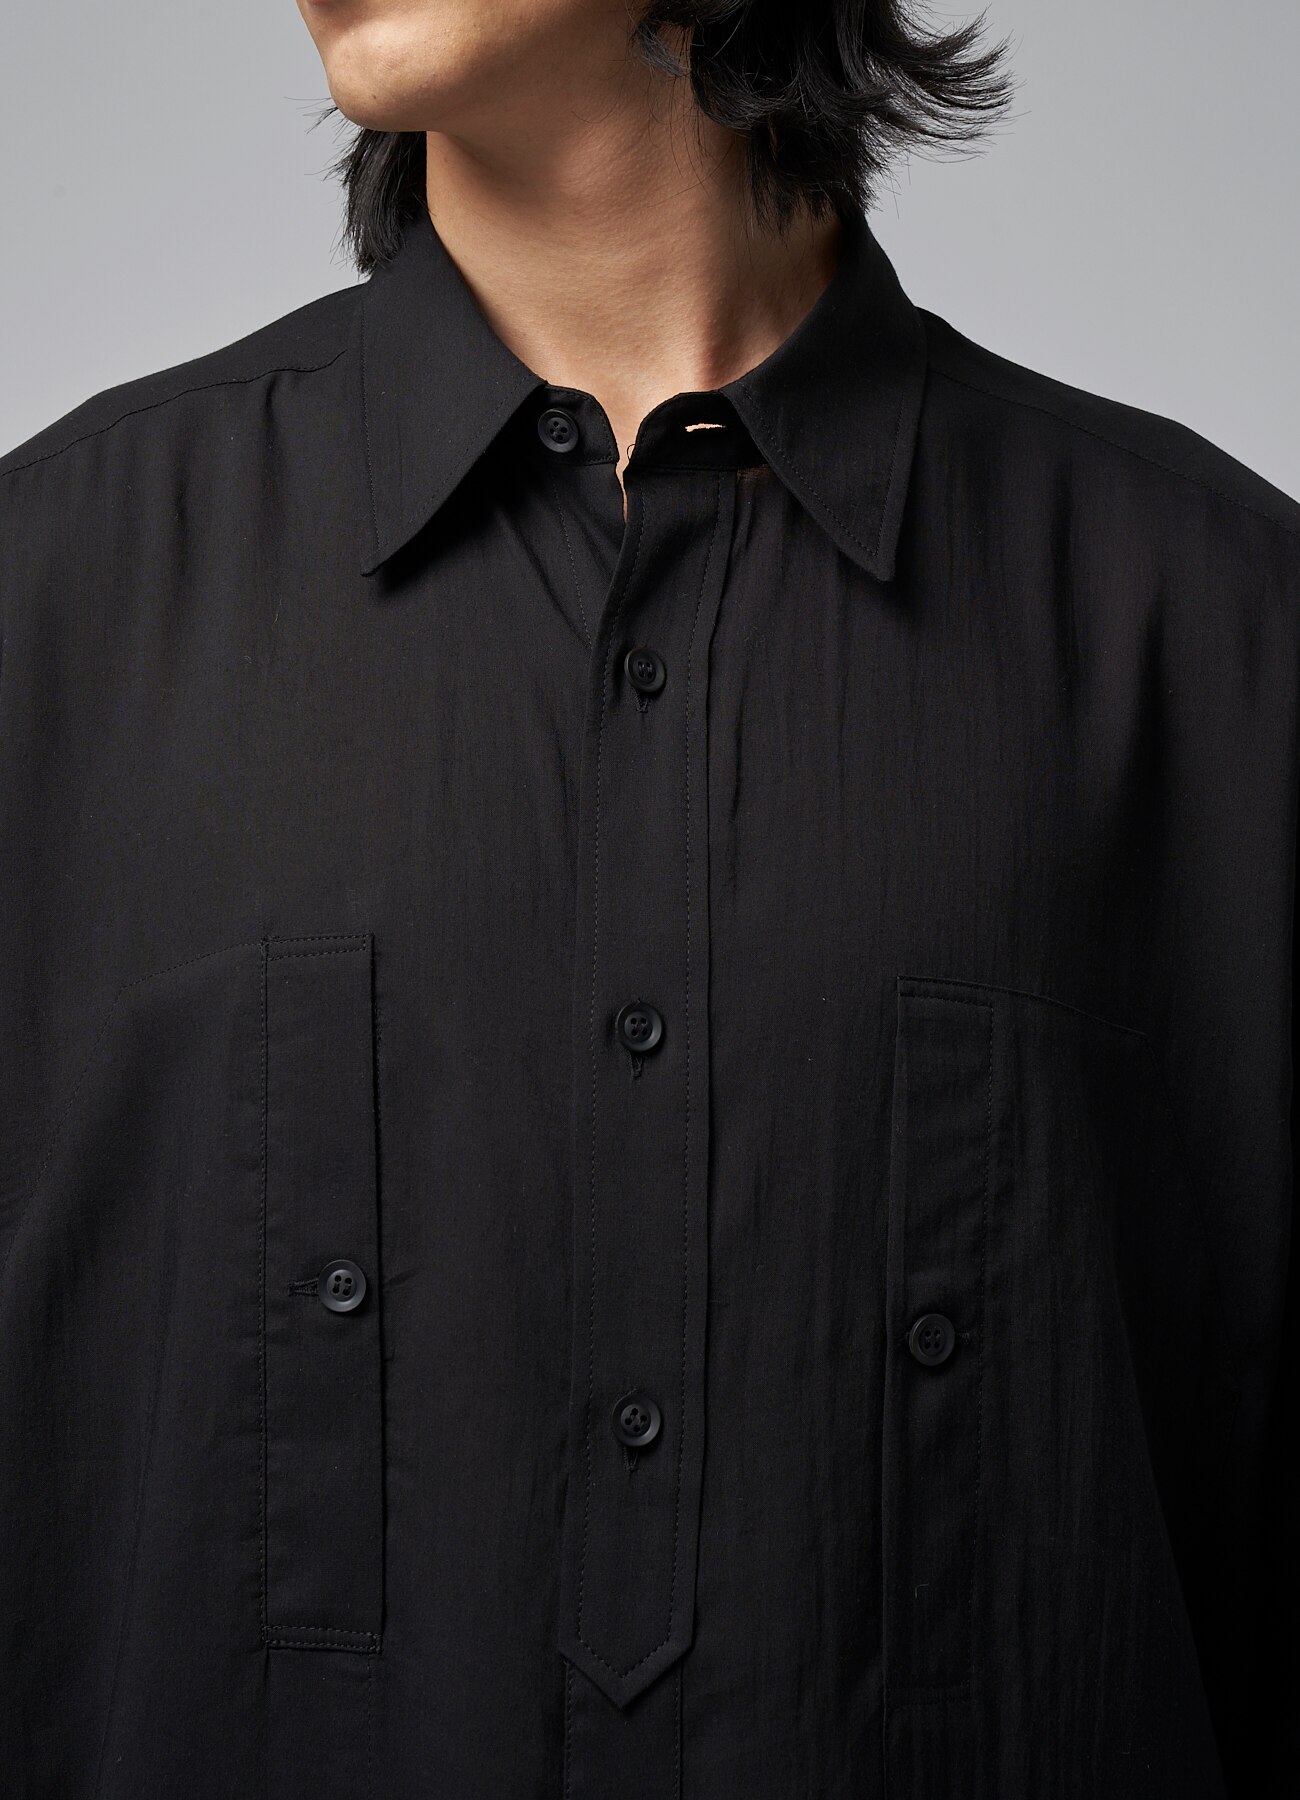 CELLULOSE LAWN SHIRT WITH ROUNDED HEM